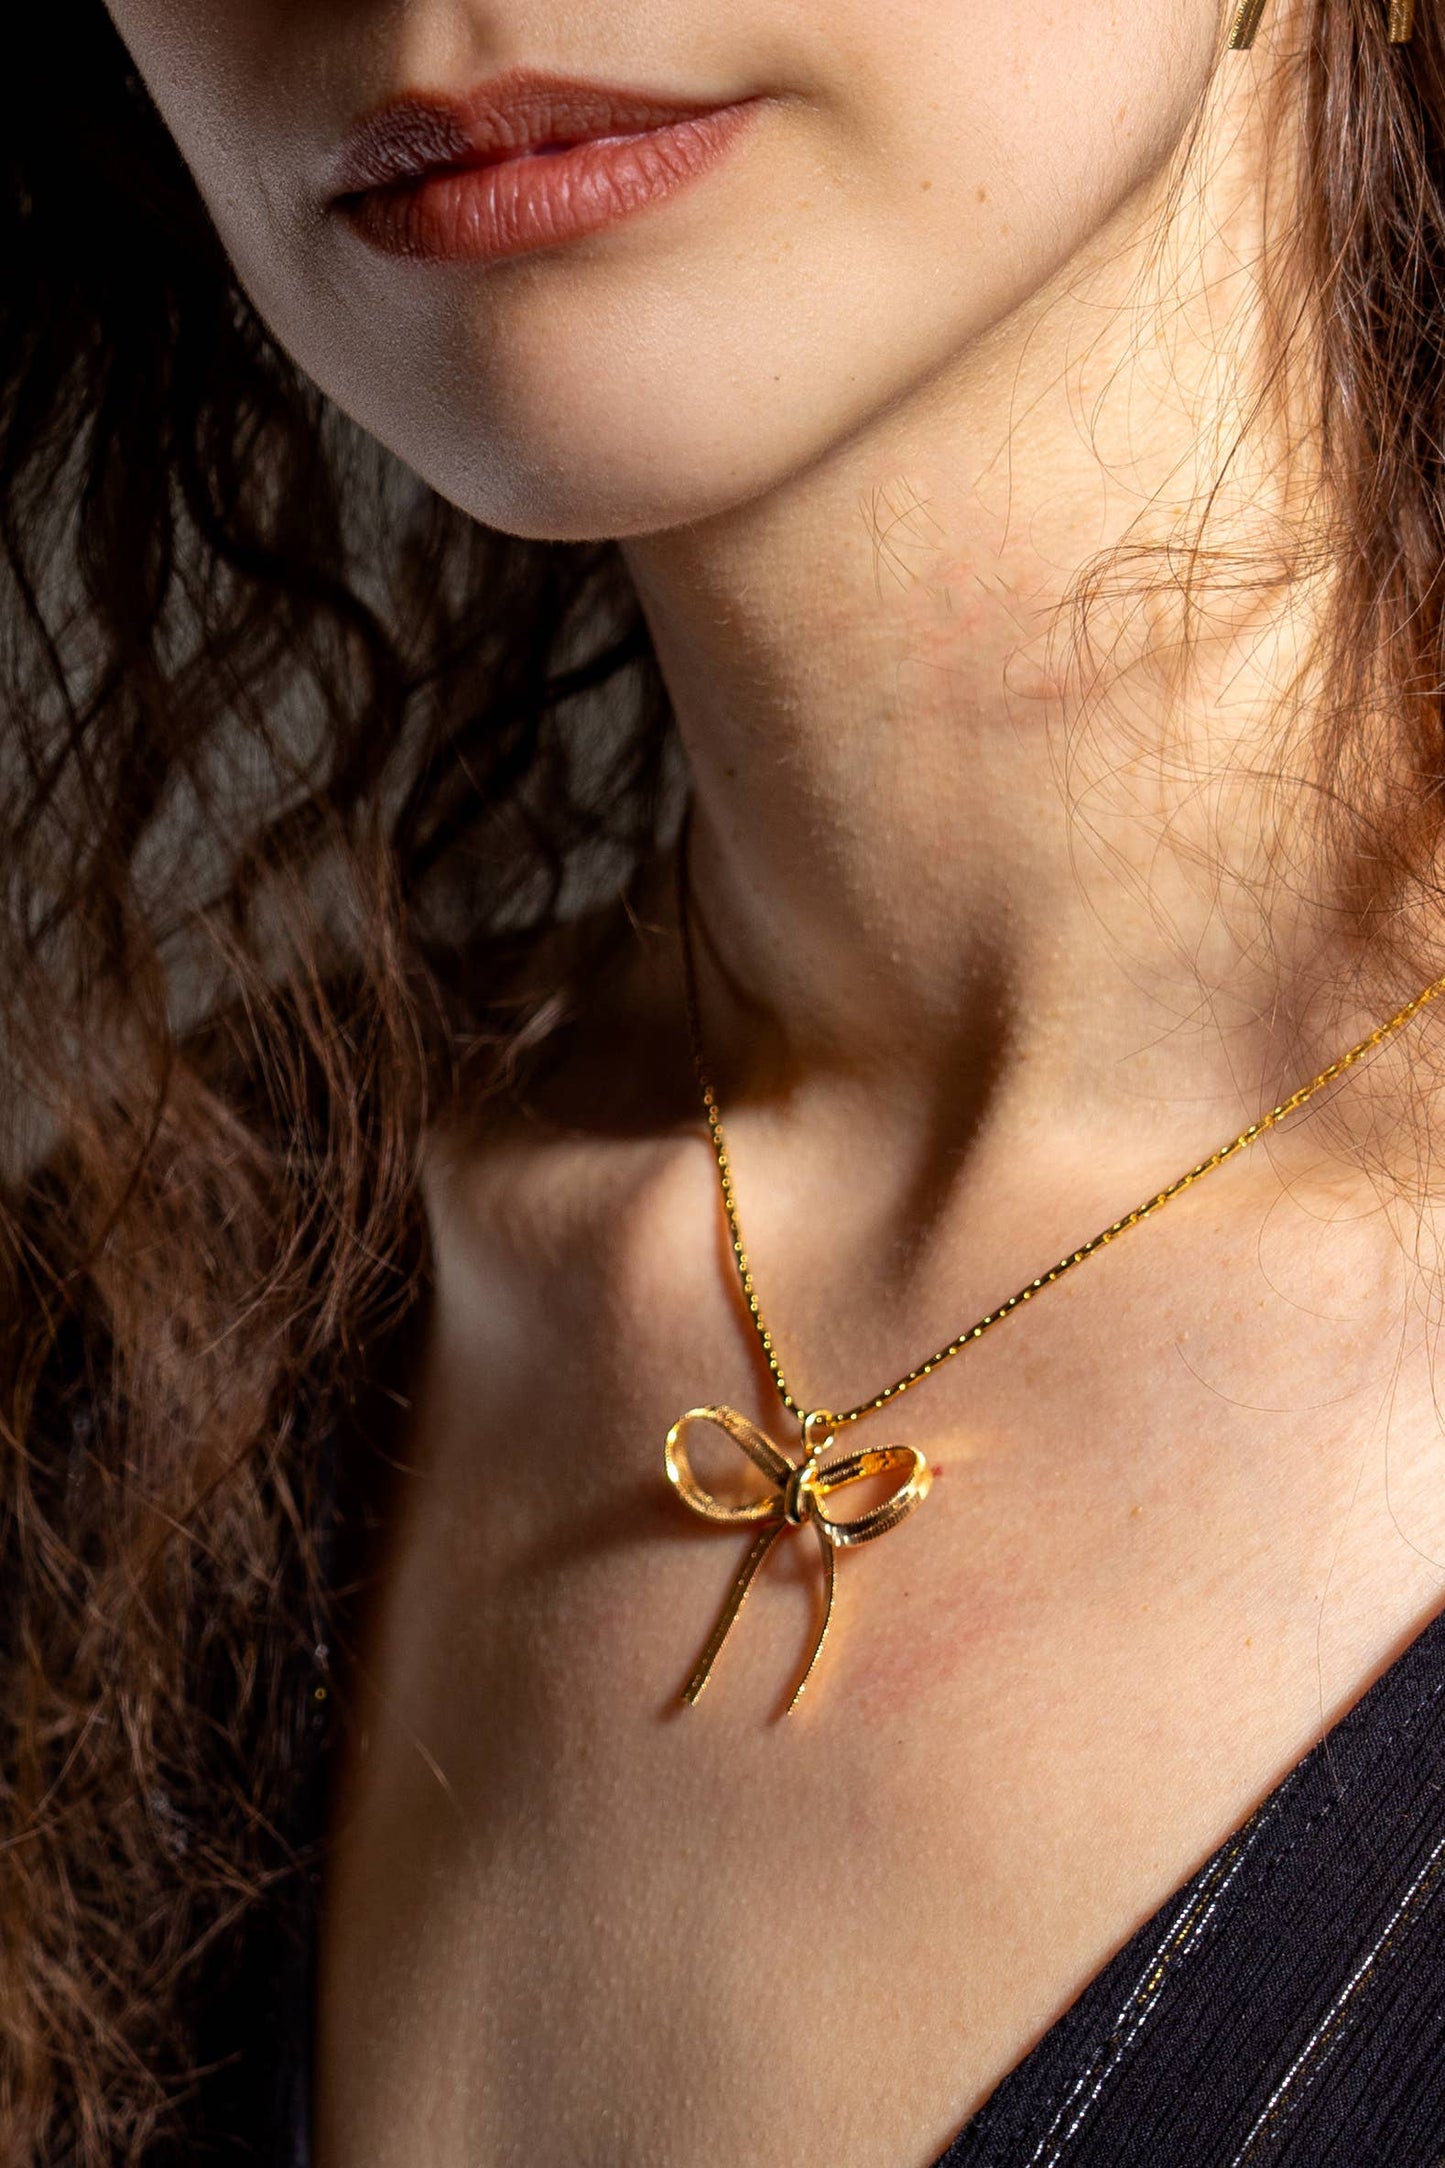 The Bow is Mine Necklace - 18k Gold Plated